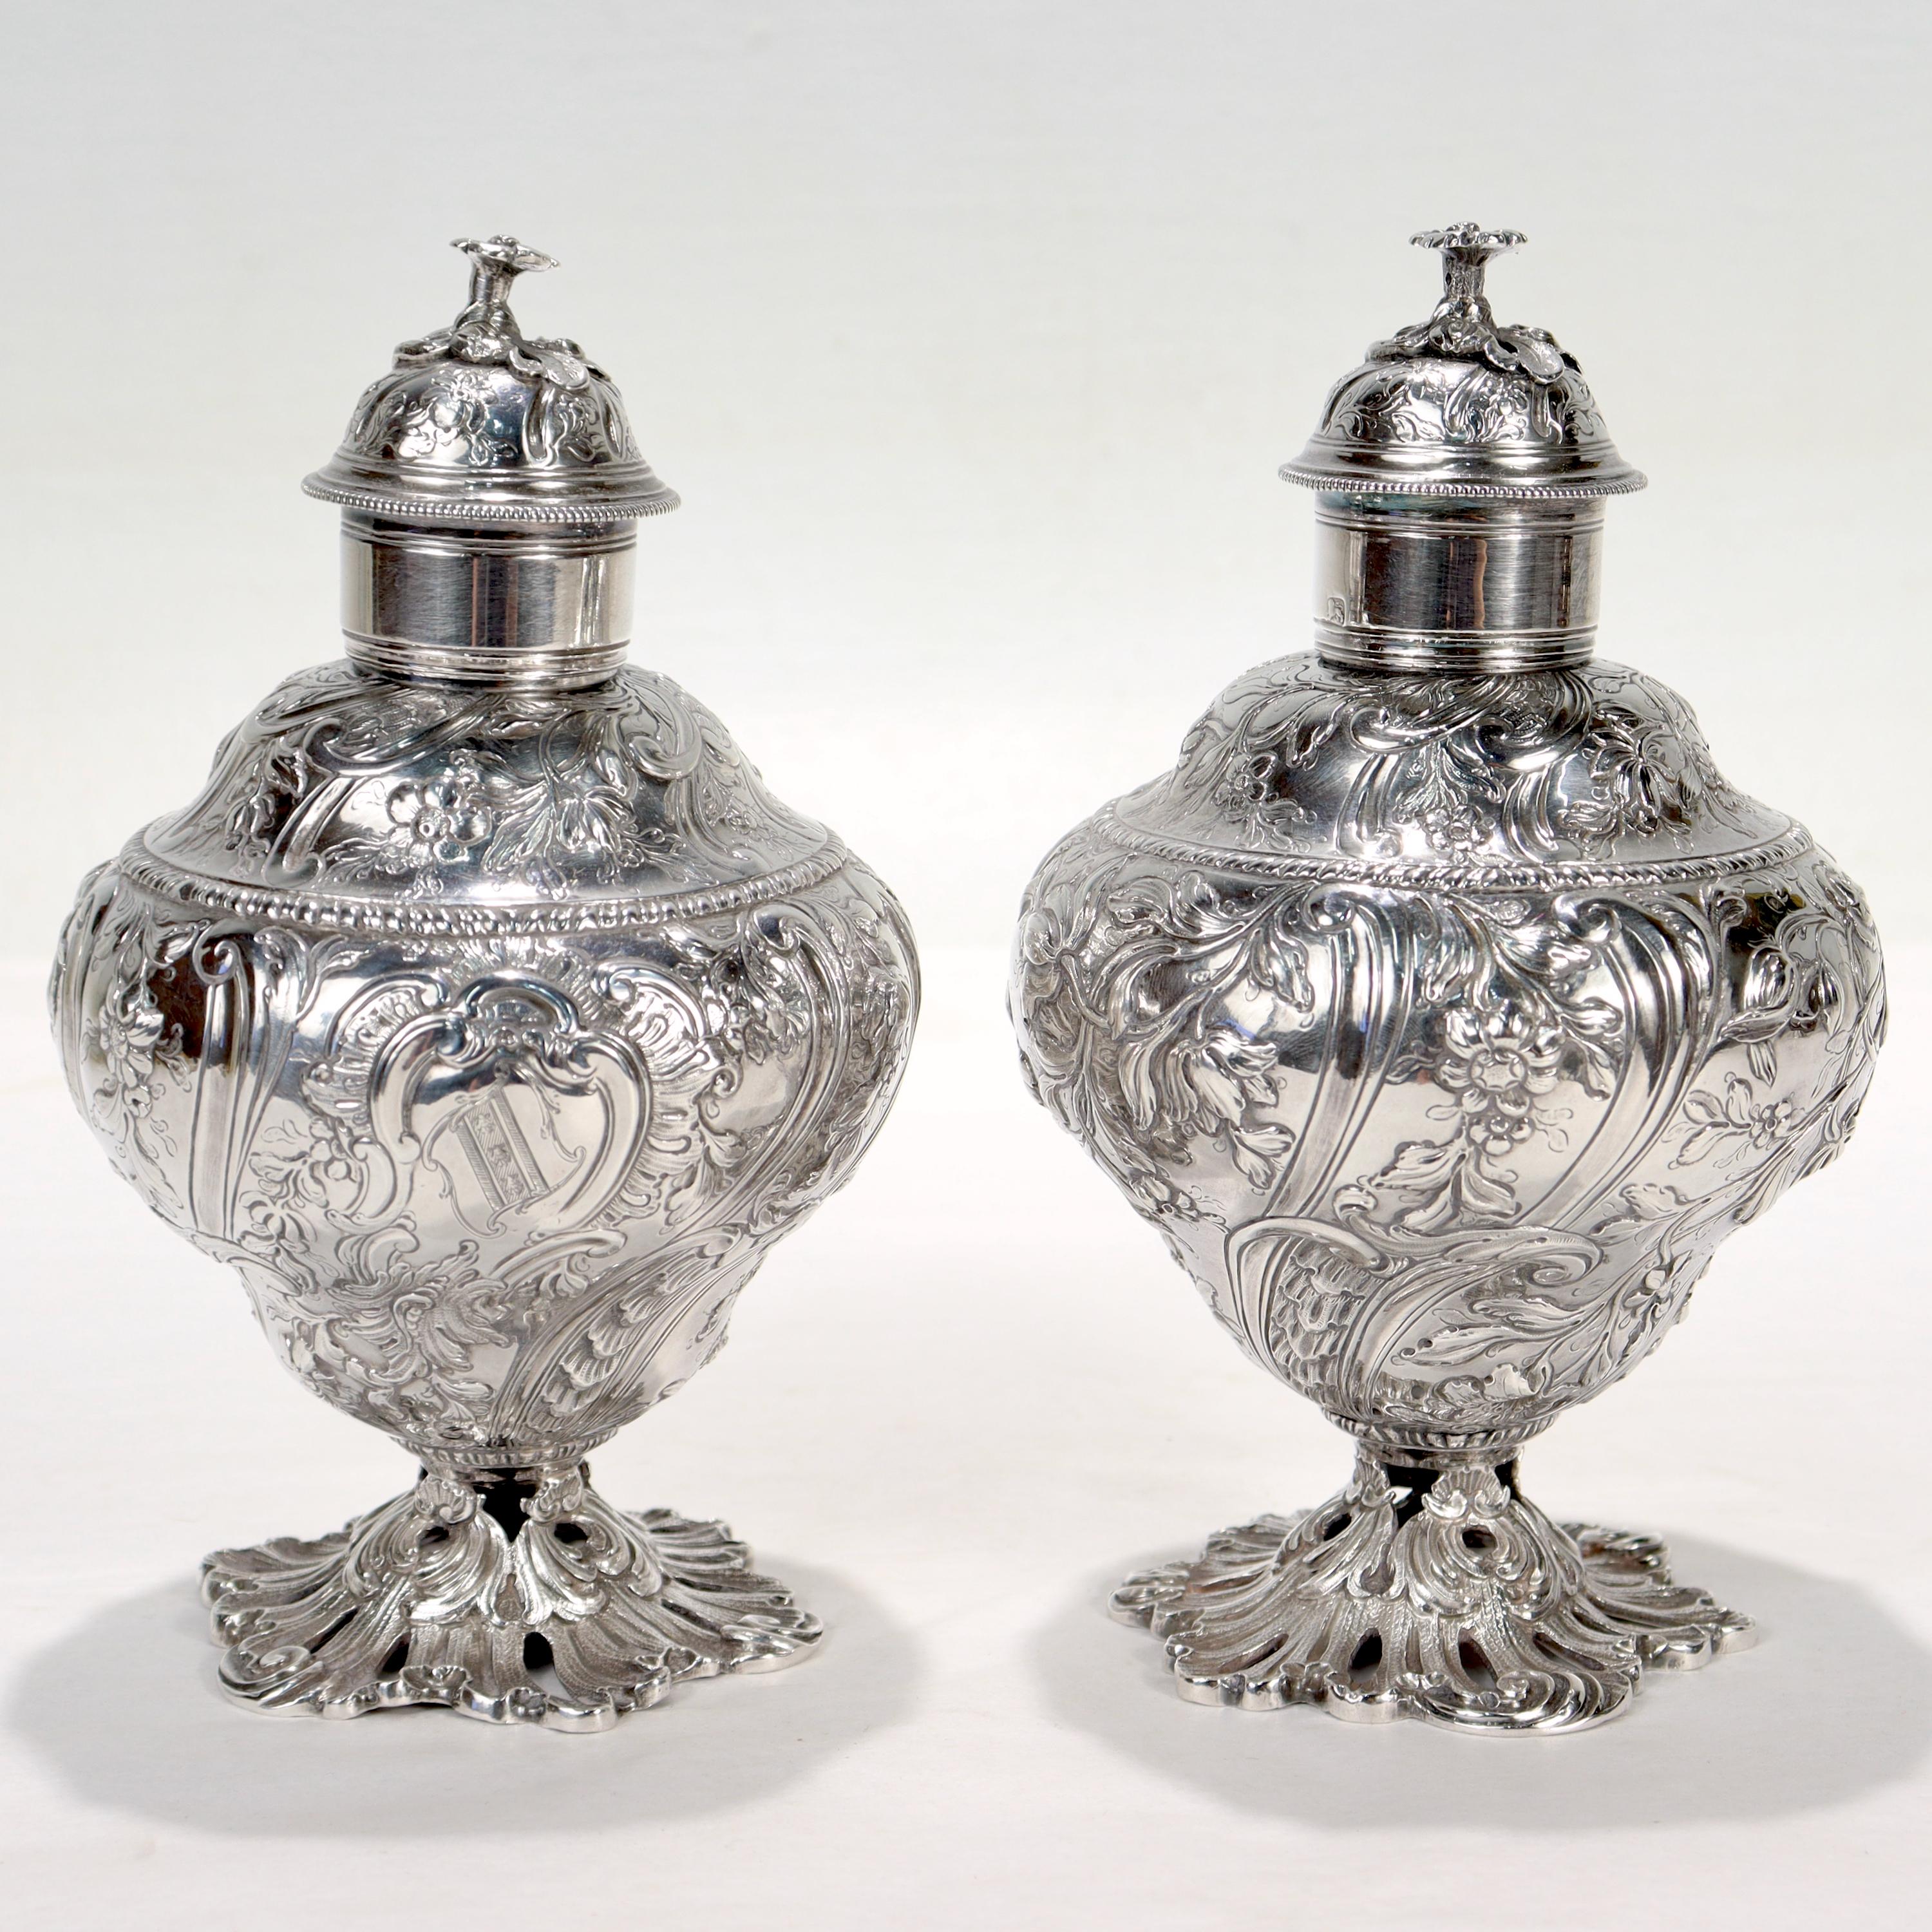 Pair of Antique Georgian English Sterling Silver Tea Caddies by Francis Crump For Sale 2